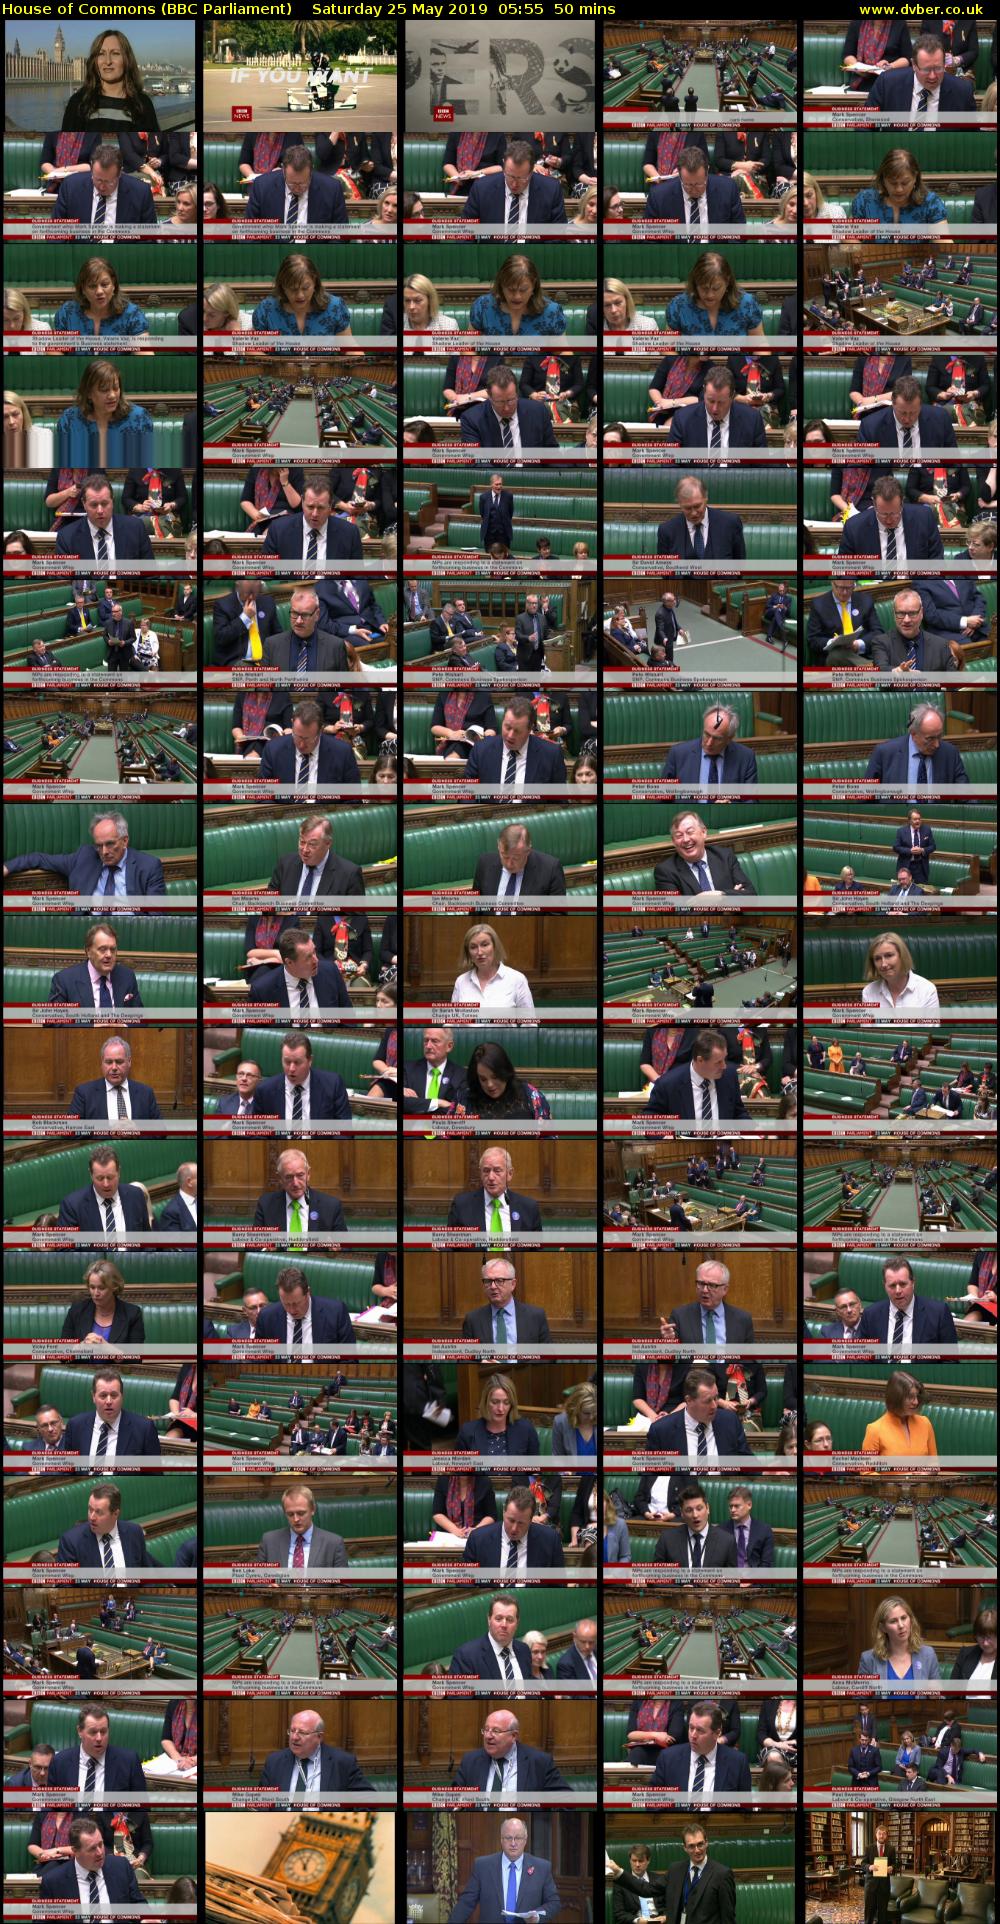 House of Commons (BBC Parliament) Saturday 25 May 2019 05:55 - 06:45